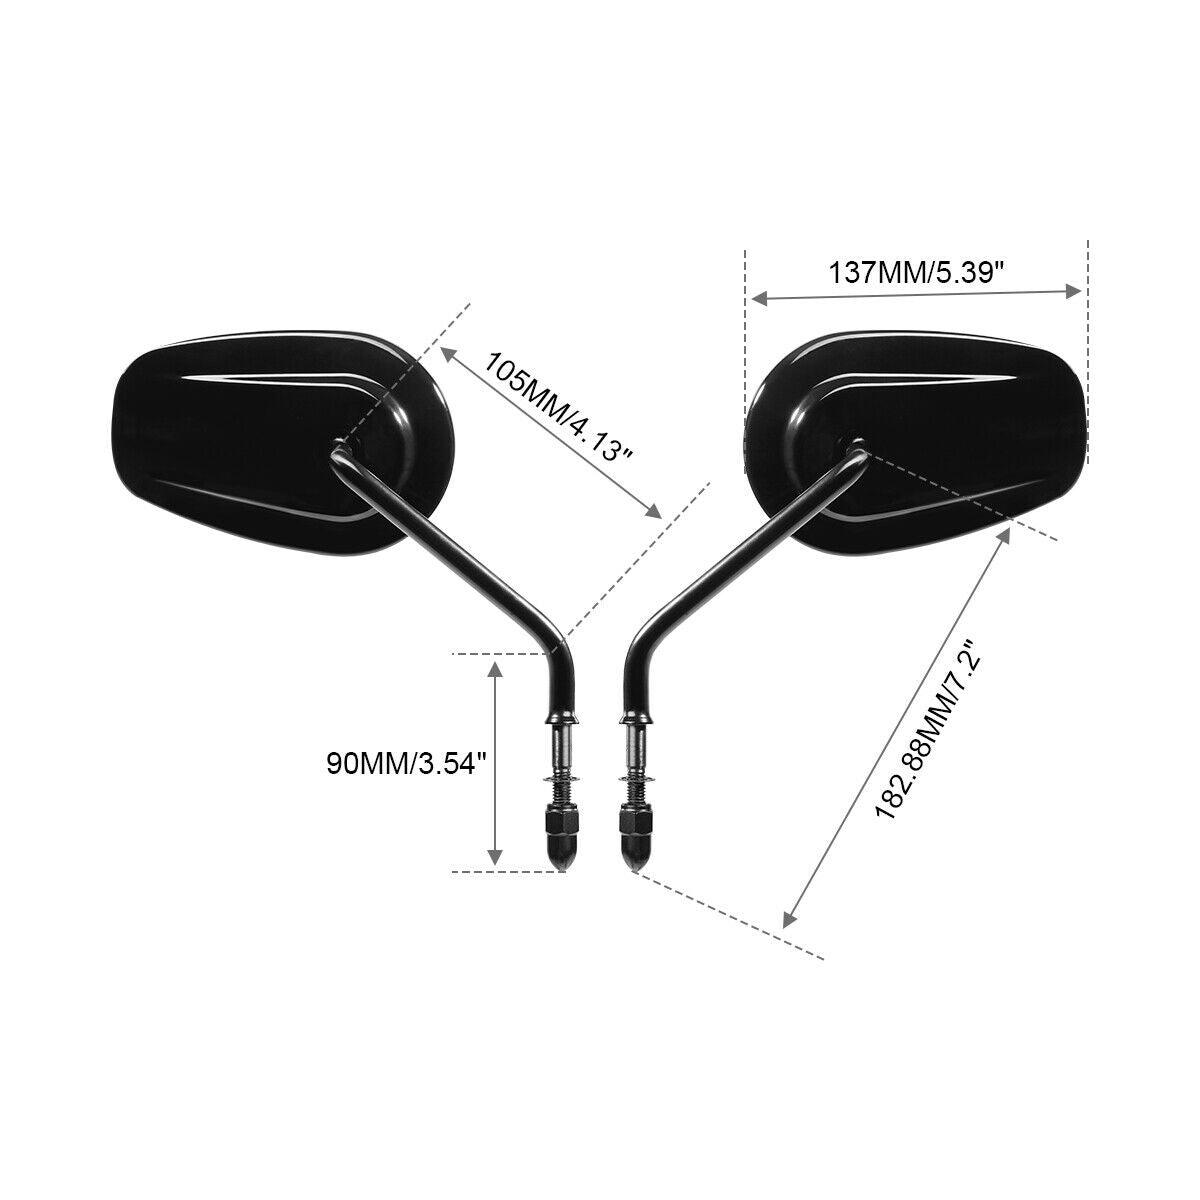 8mm Rearview Mirrors Fit For Harley Touring Road King Street Electra Road Glide - Moto Life Products